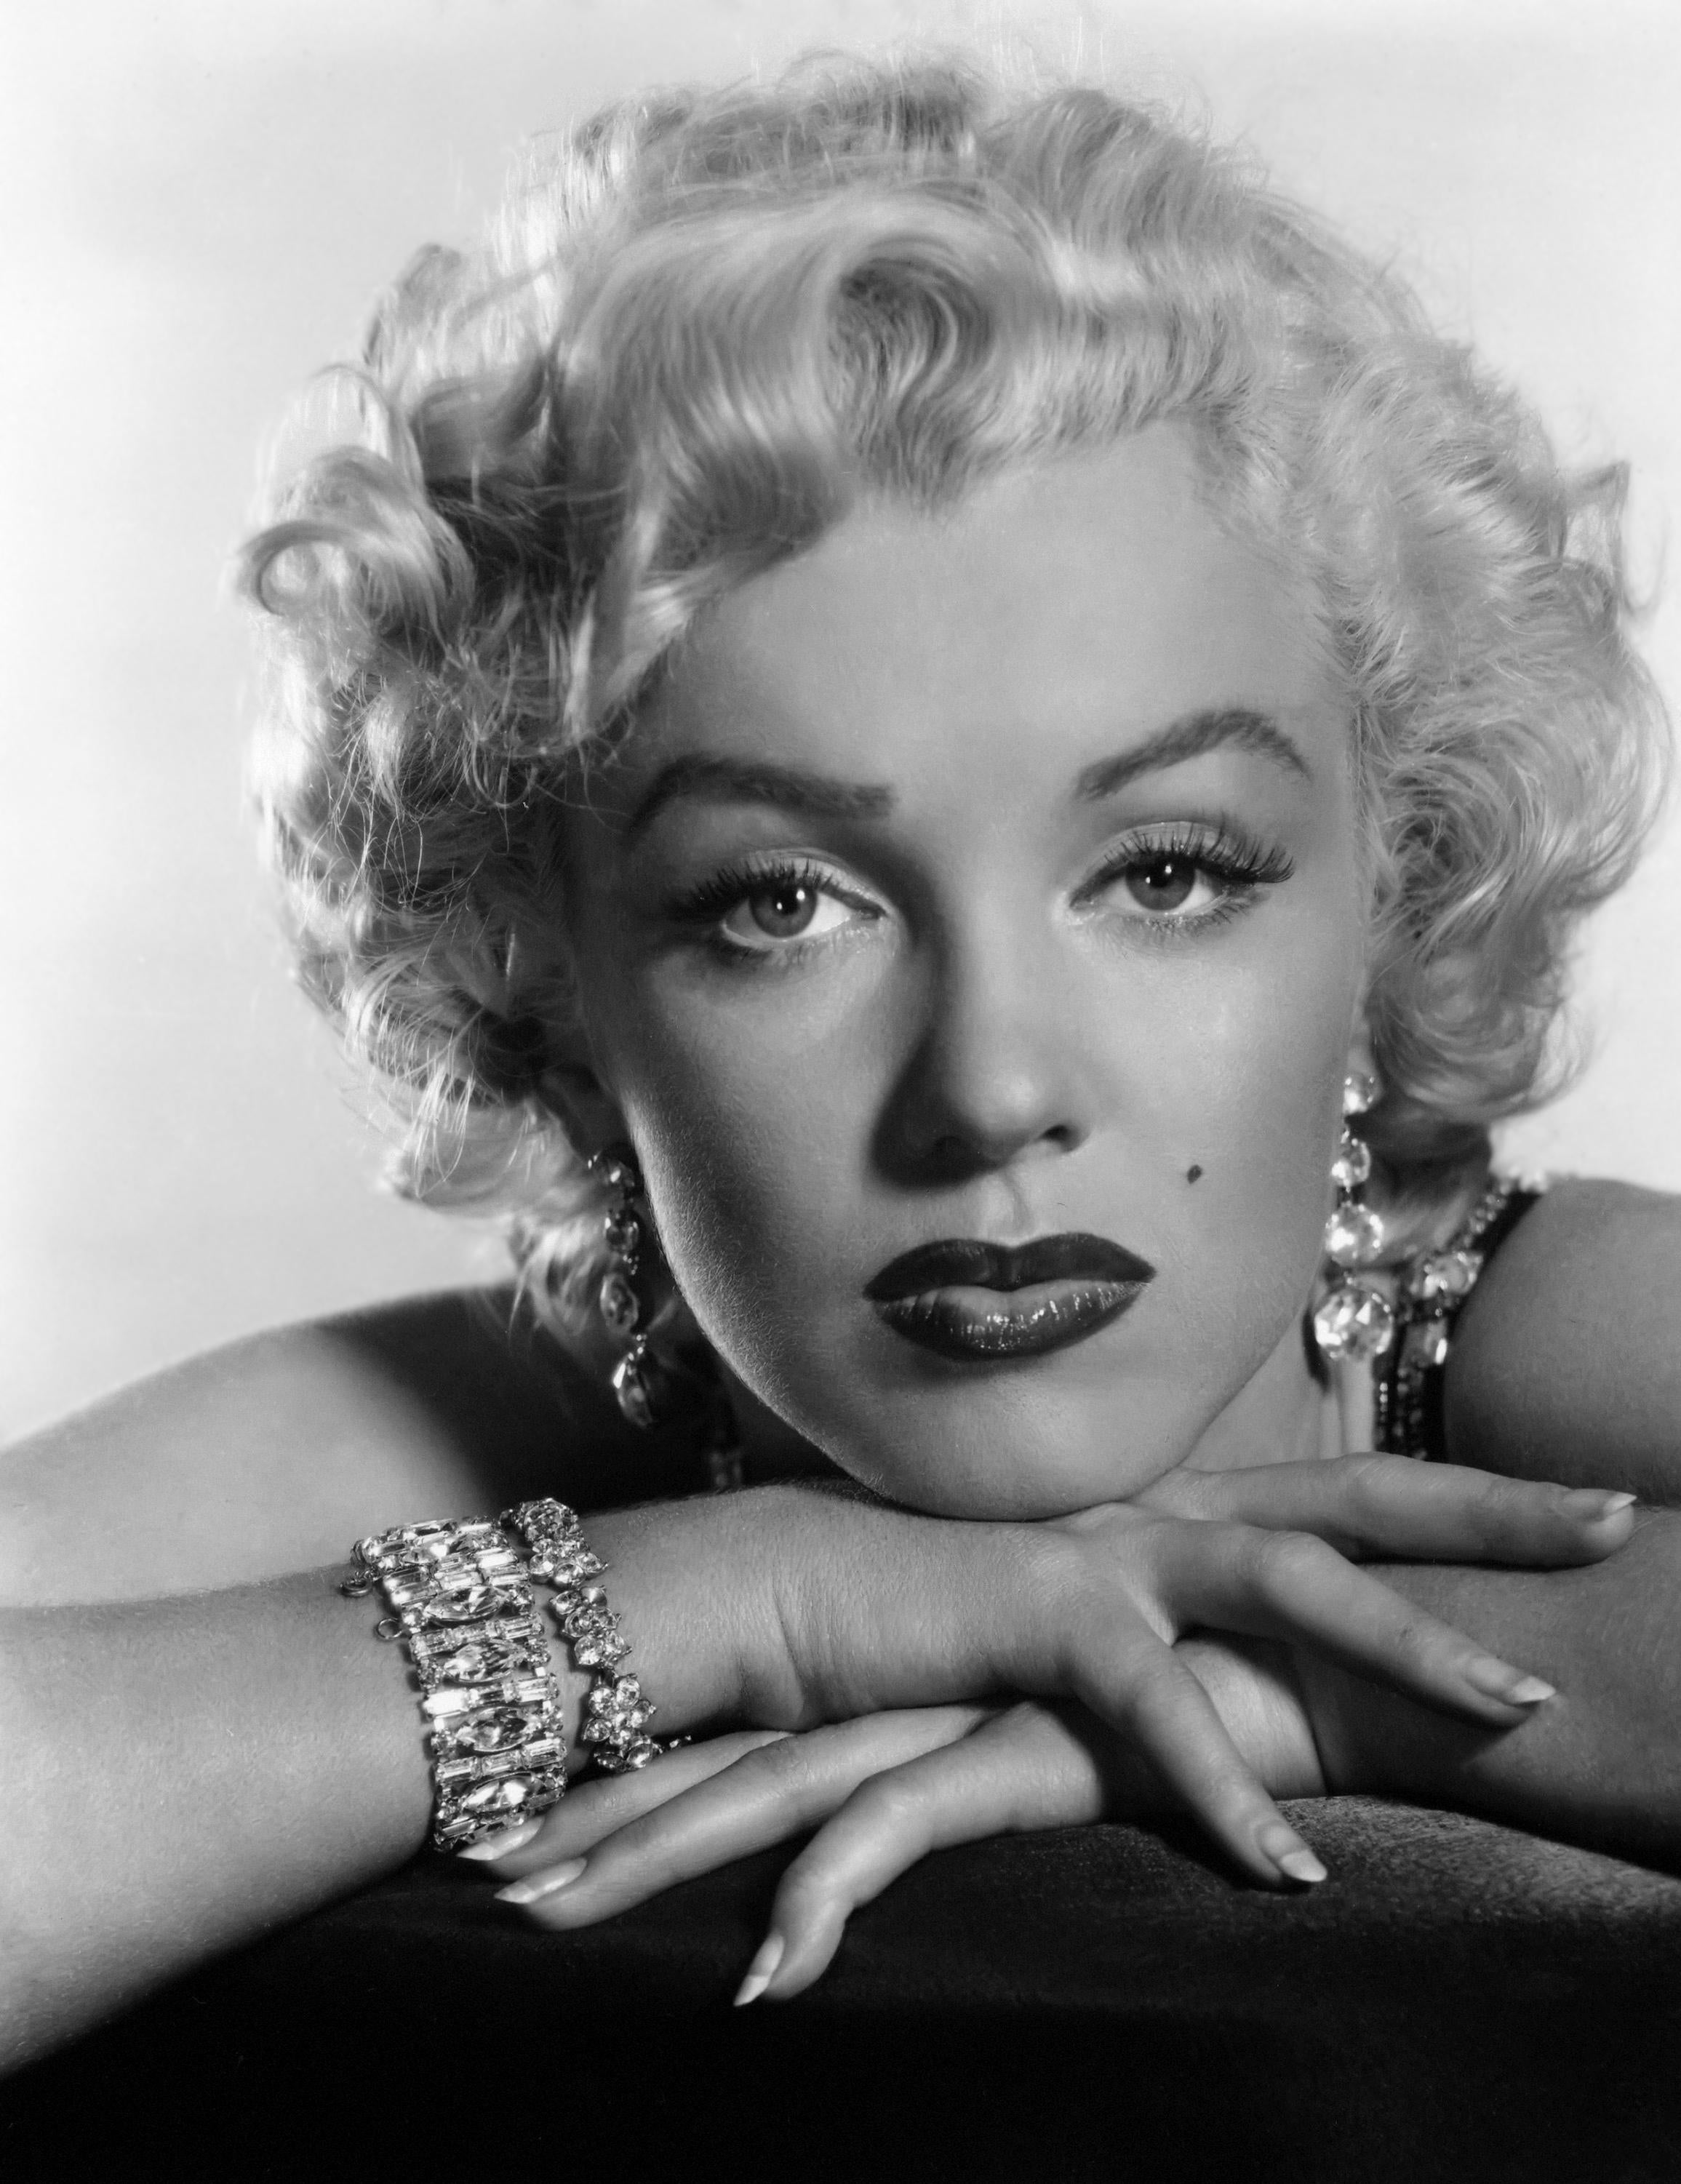 Unknown Portrait Photograph - Marilyn Monroe Exceptional Glamour in the Studio Globe Photos Fine Art Print